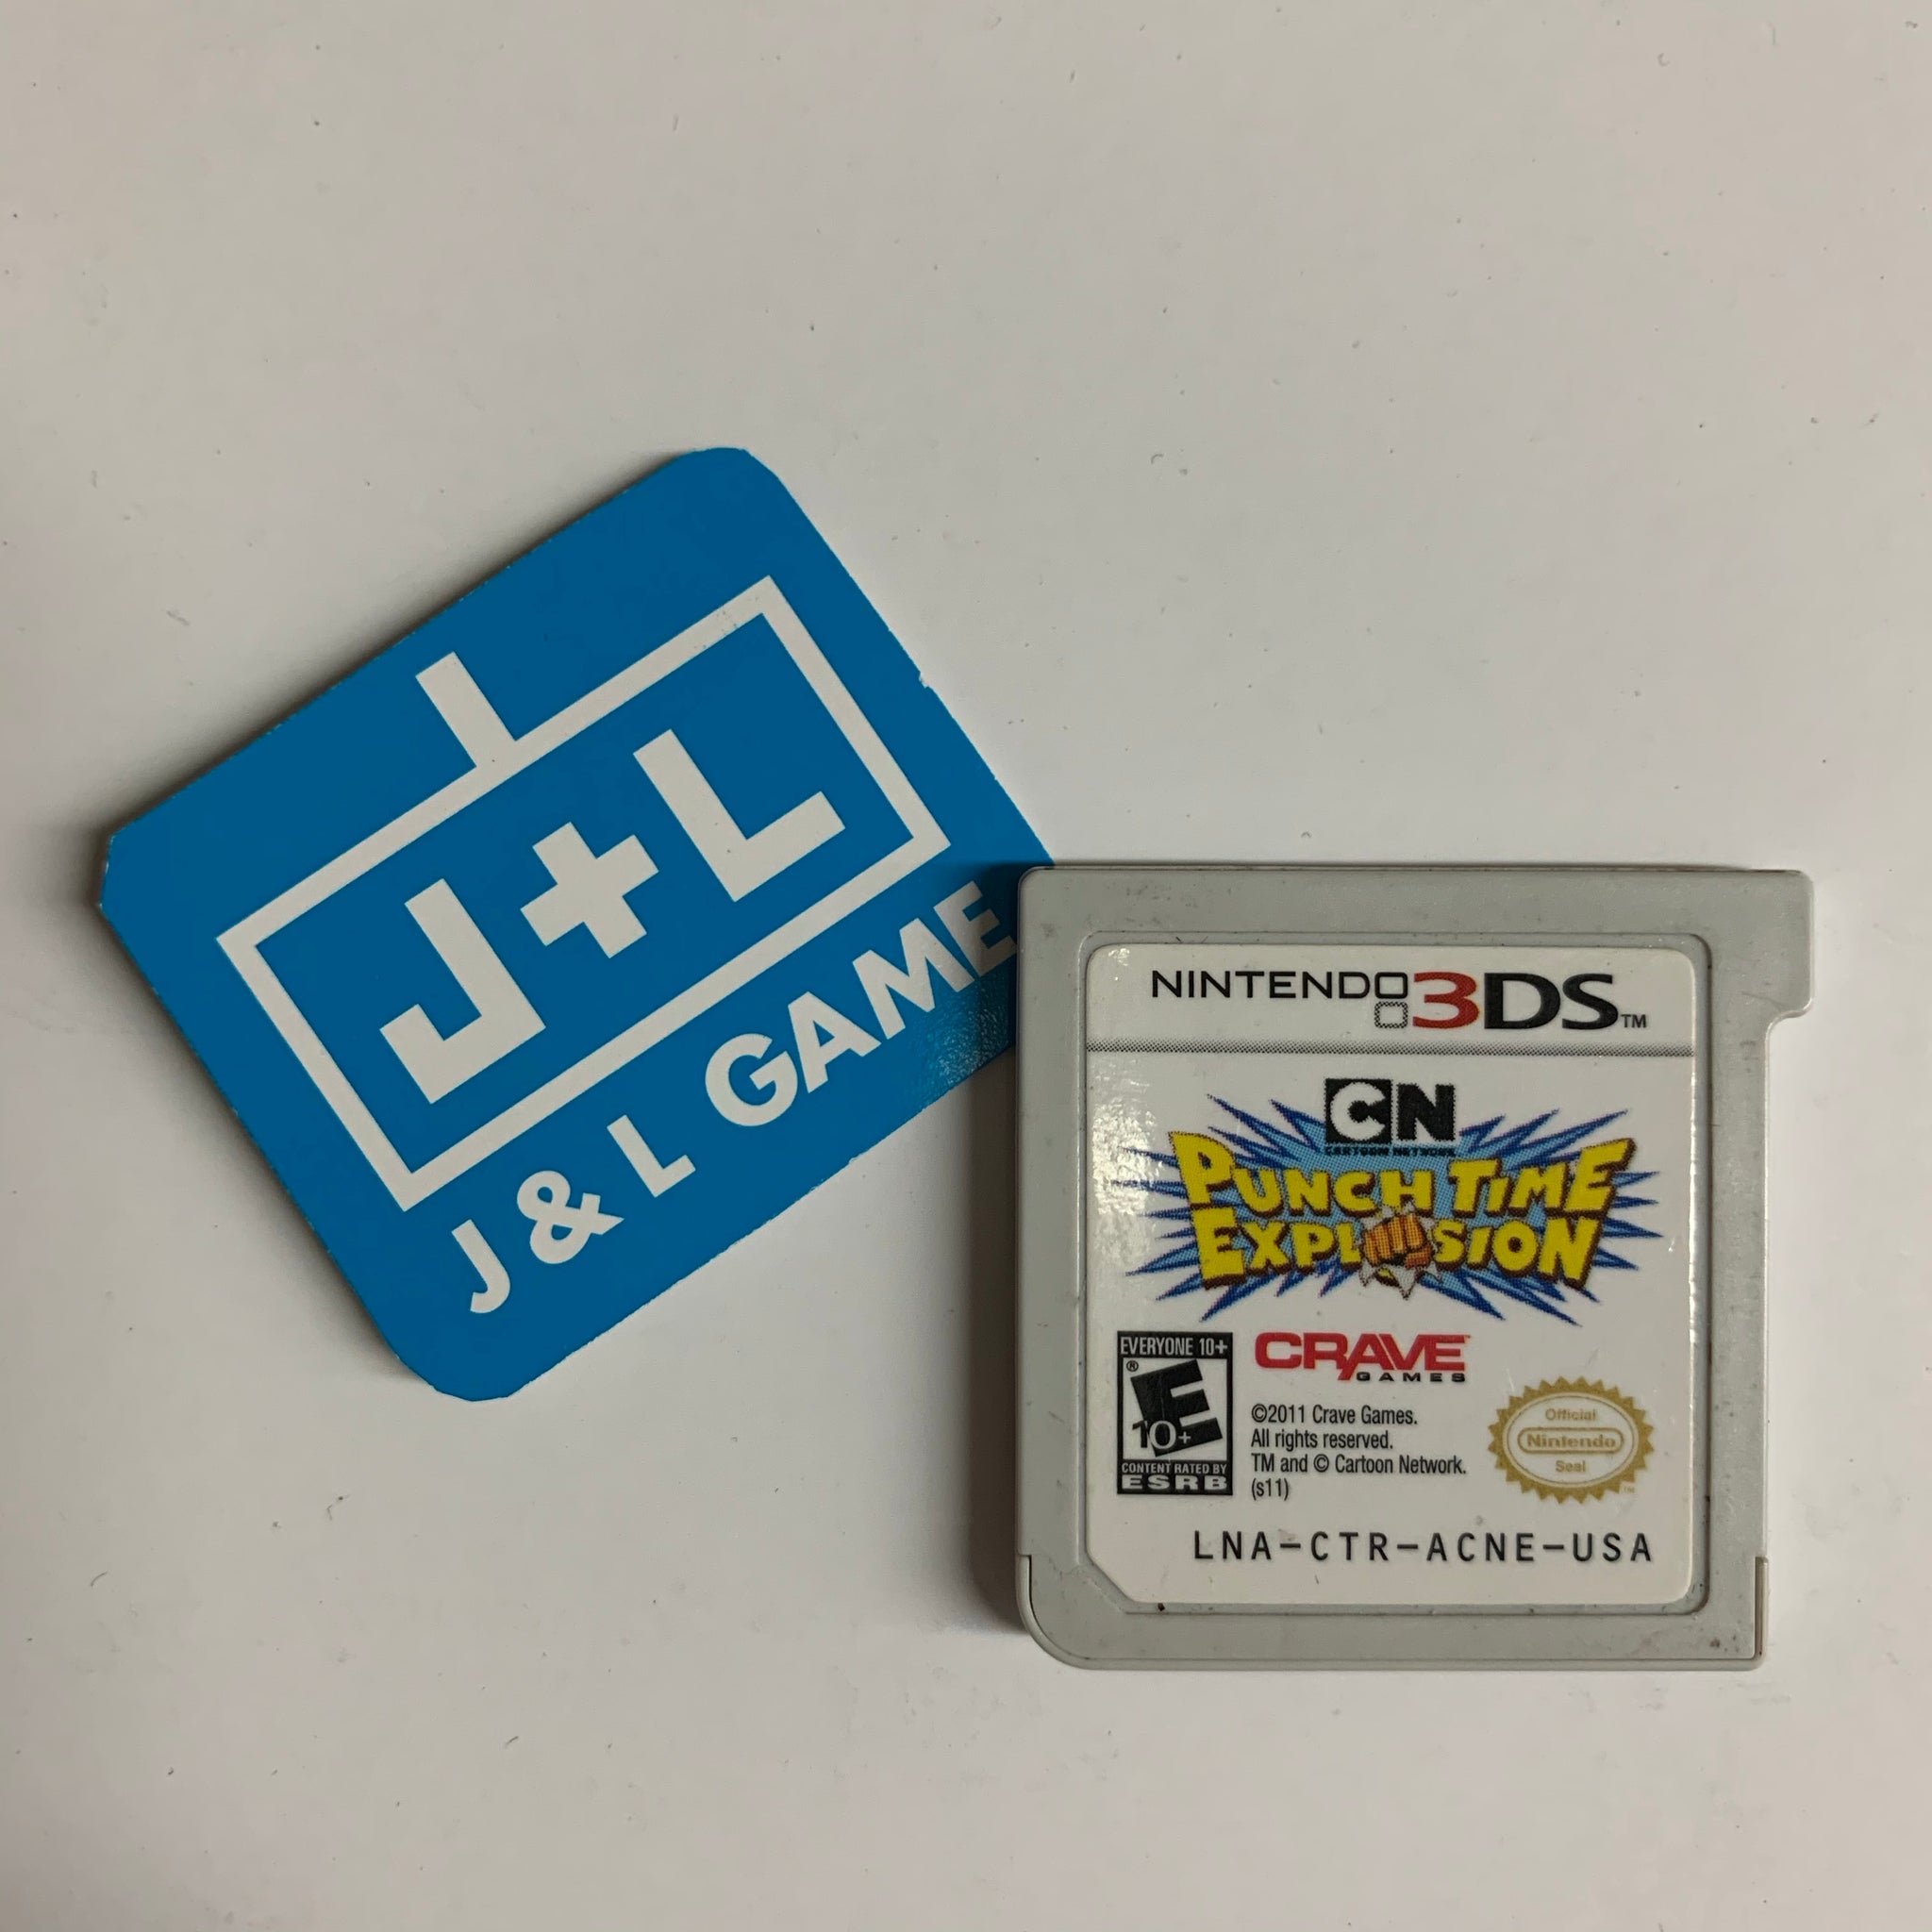 Cartoon Network: Punch Time Explosion - Nintendo 3DS [Pre-Owned] Video Games Crave   